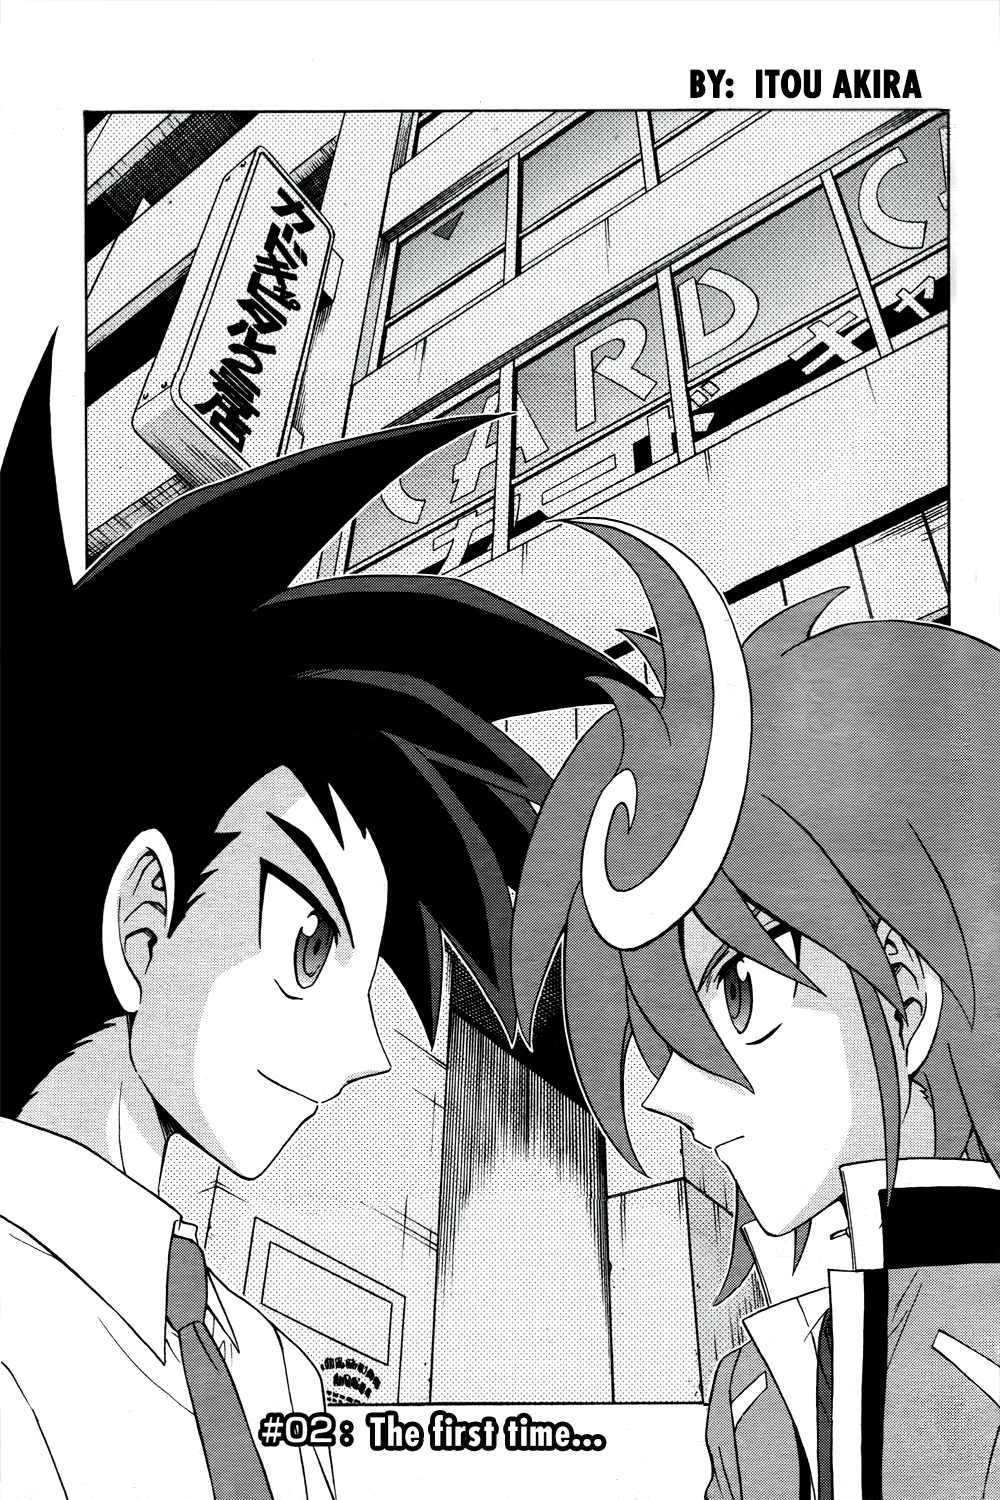 Cardfight!! Vanguard G: The Prologue Vol.1 Chapter 2: For The First Time... - Picture 3